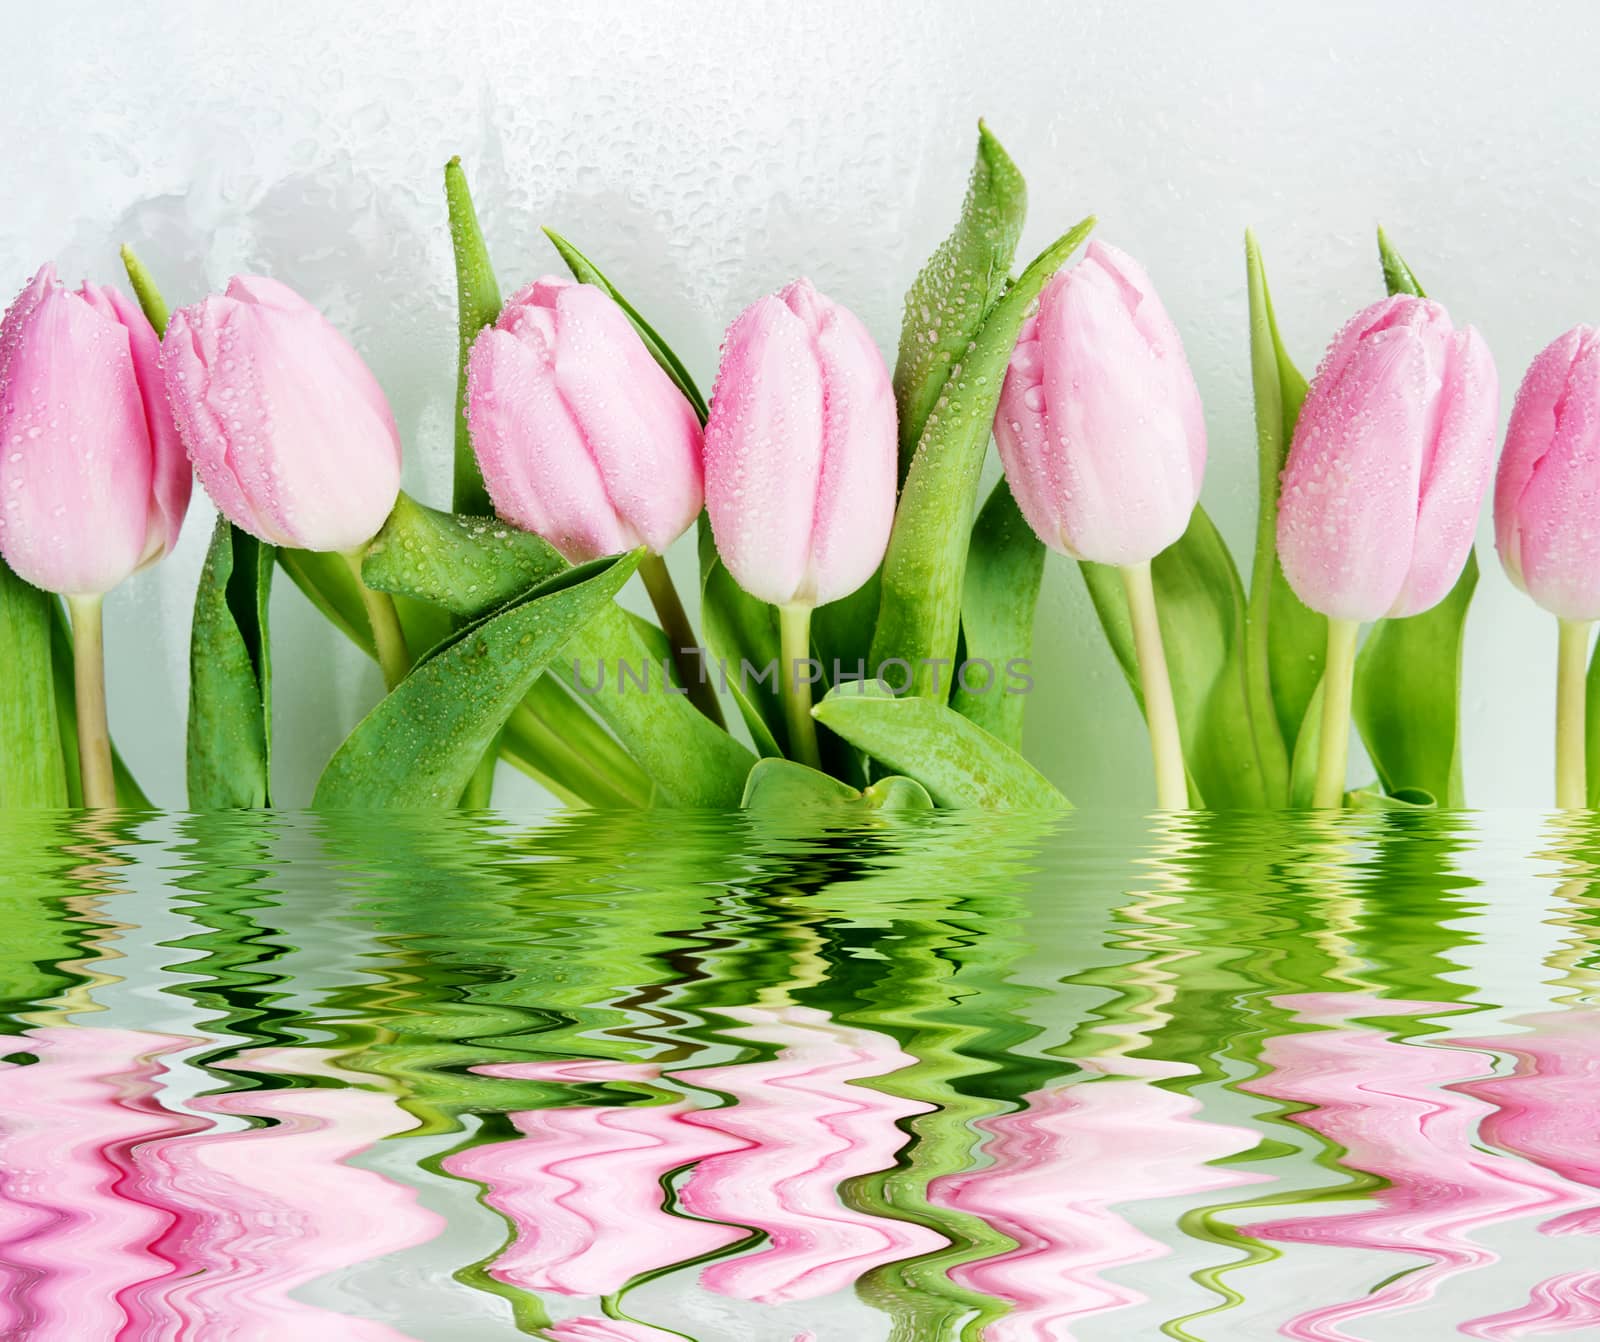 Border consisting of fresh pink tulips flowers covered with dew drops close-up on white background, reflected in a water surface with small waves